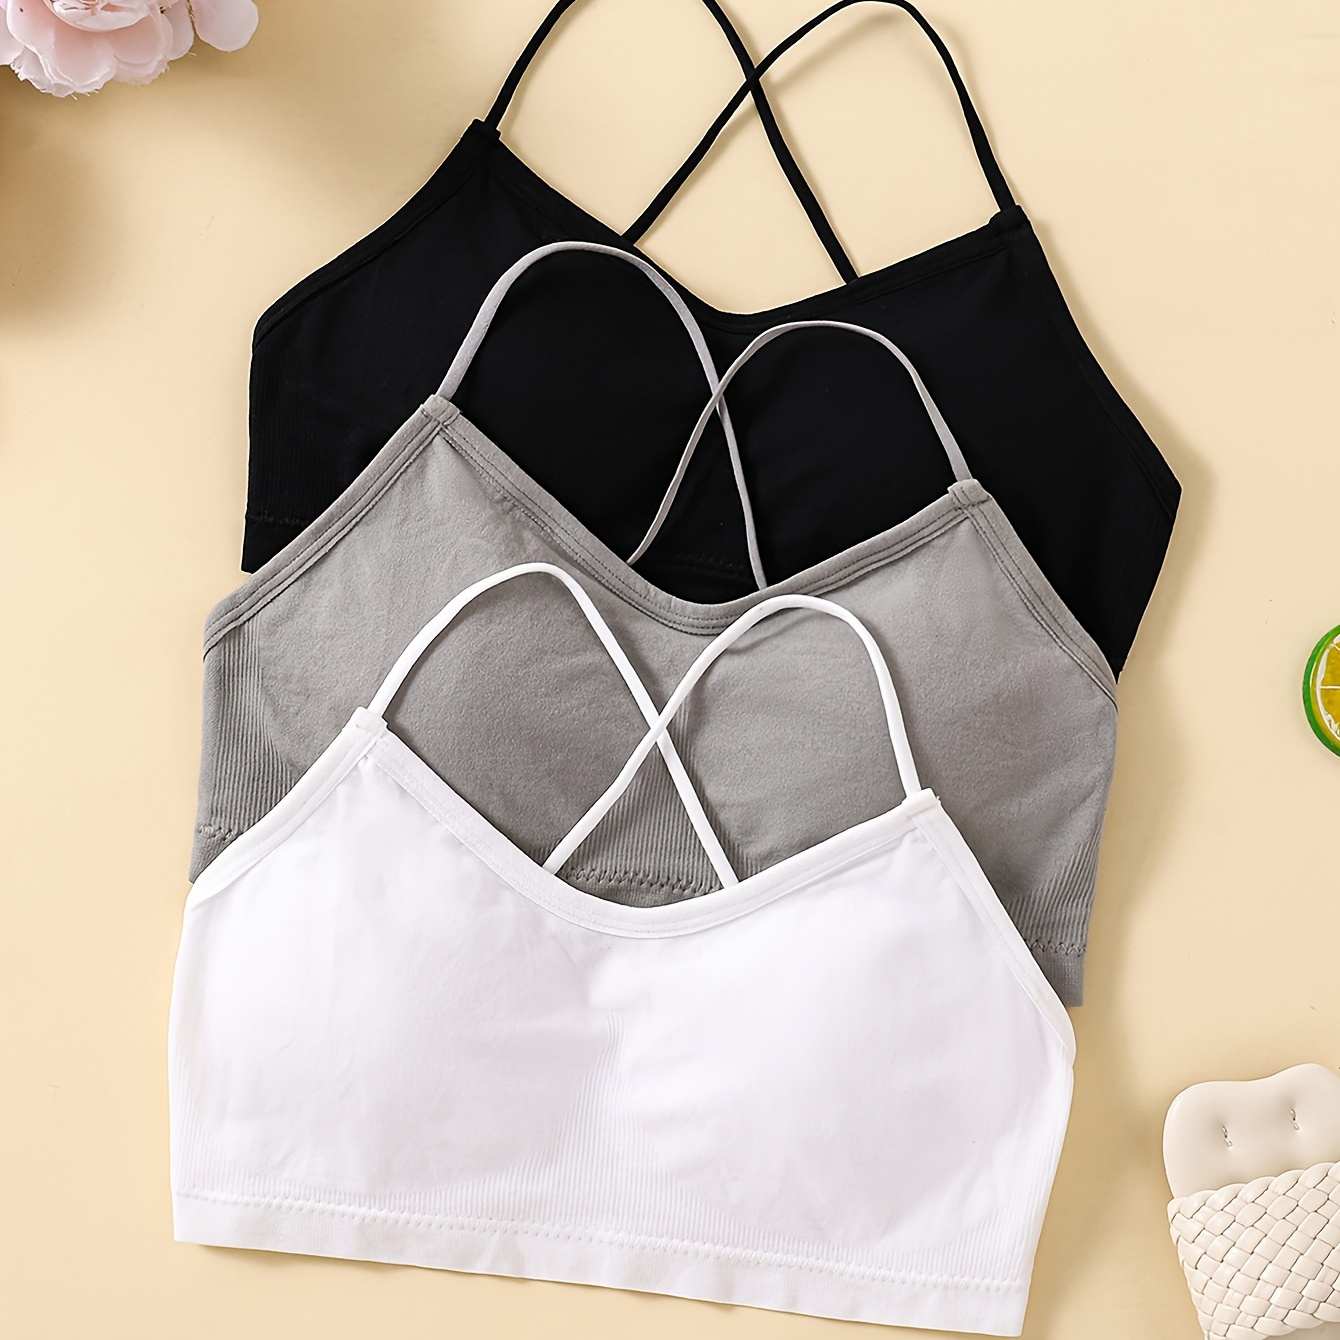 

3 Pcs Pop Girls Crisscross Back Bras, Undershirts, Ladies Sports Cotton Blend Tanks & Camisoles Suitable For 10-14 Years Old Girls